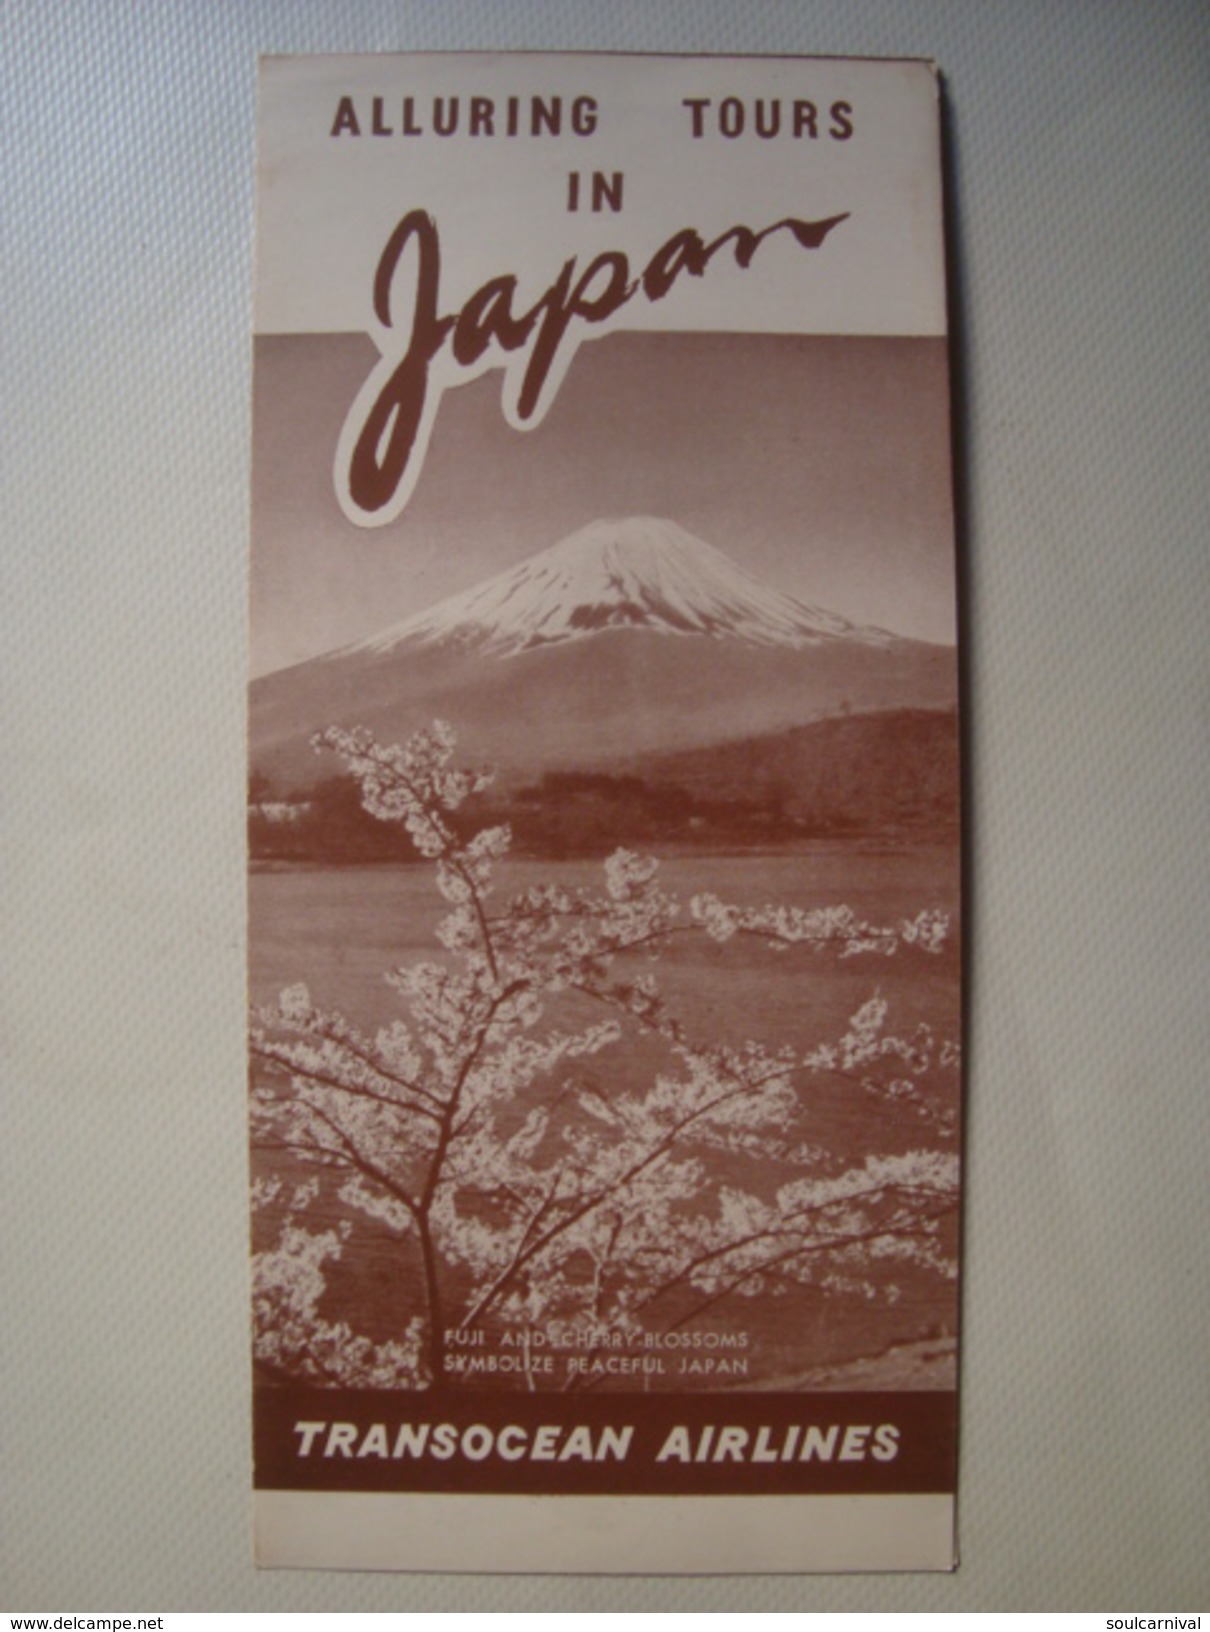 ALLURING TOURS IN JAPAN. TRANSOCEAN AIRLINES. FUJI CHERRY-BLOSSOMS PEACEFUL JAPAN - 1950 APROX. MADE IN OCCUPIED JAPAN. - Advertisements